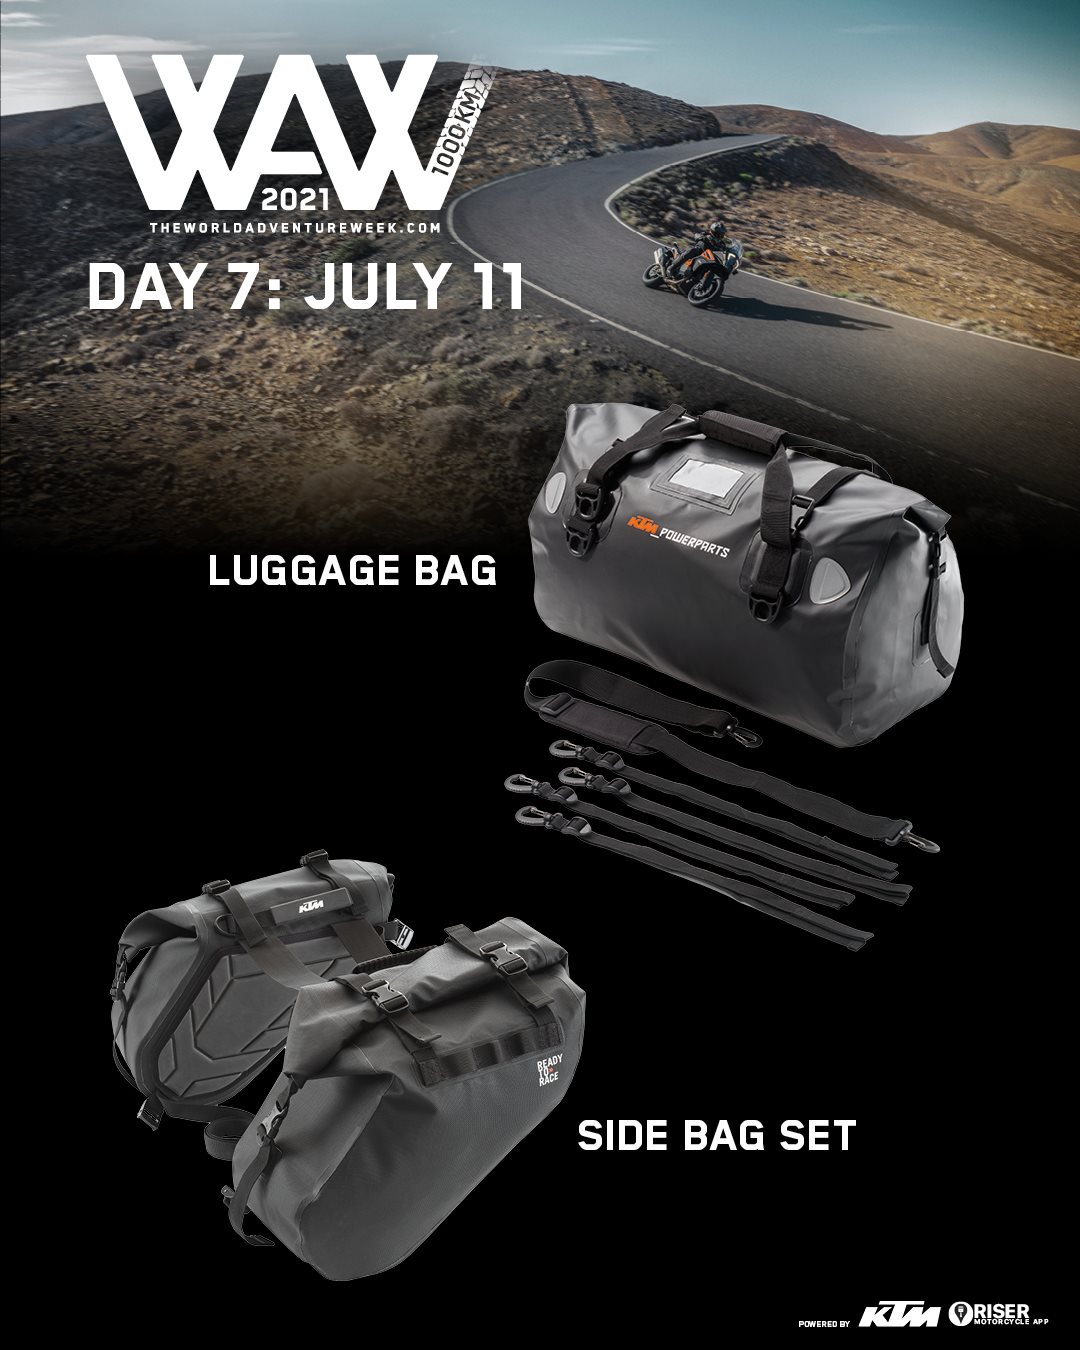 THE WORLD ADVENTURE WEEK - day 7 prize